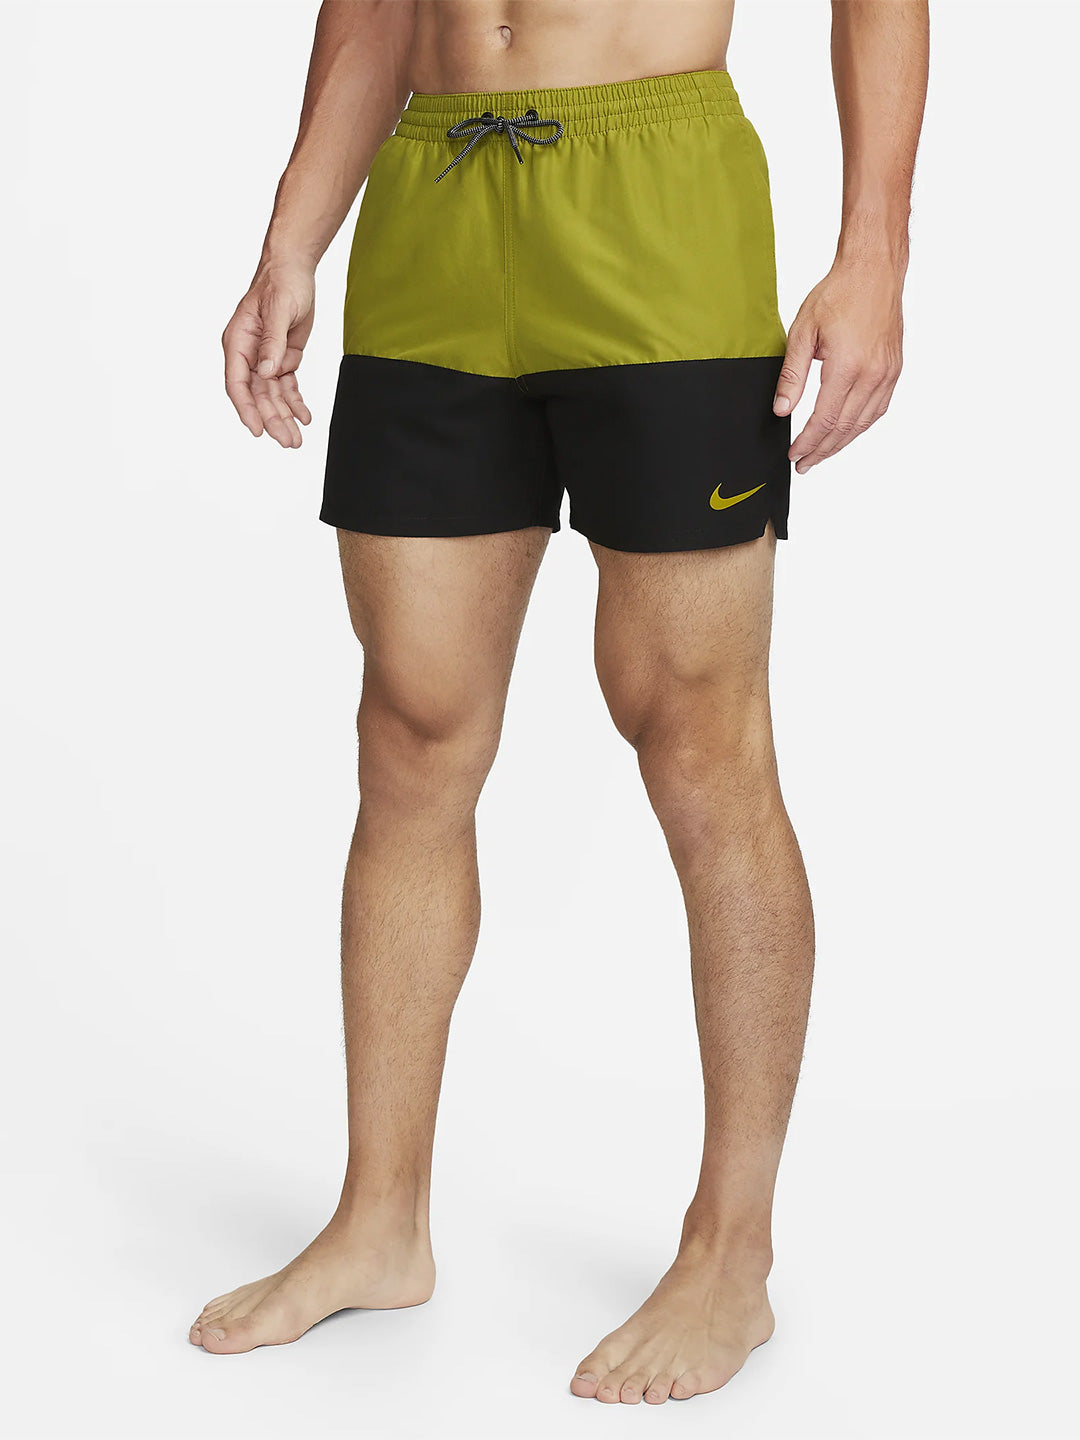 Nike green and black swimsuit shorts